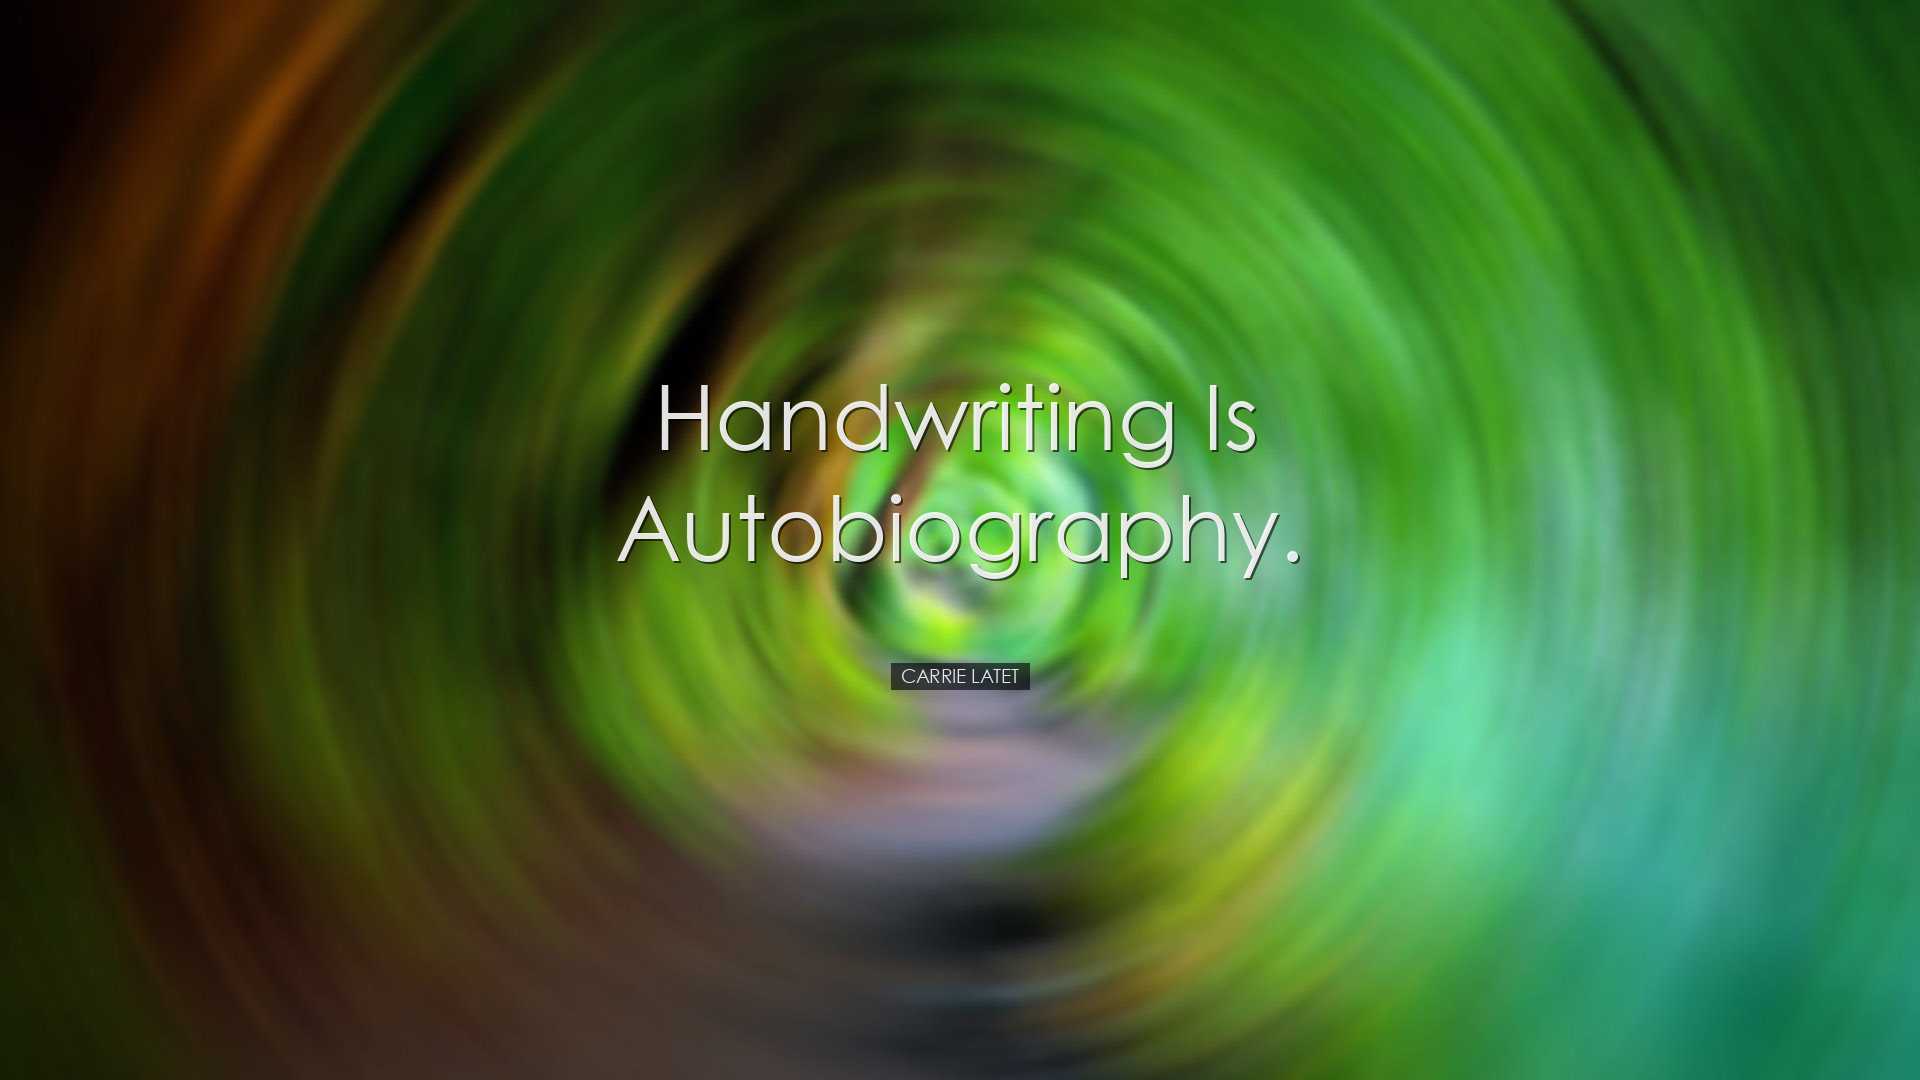 Handwriting is autobiography. - Carrie Latet